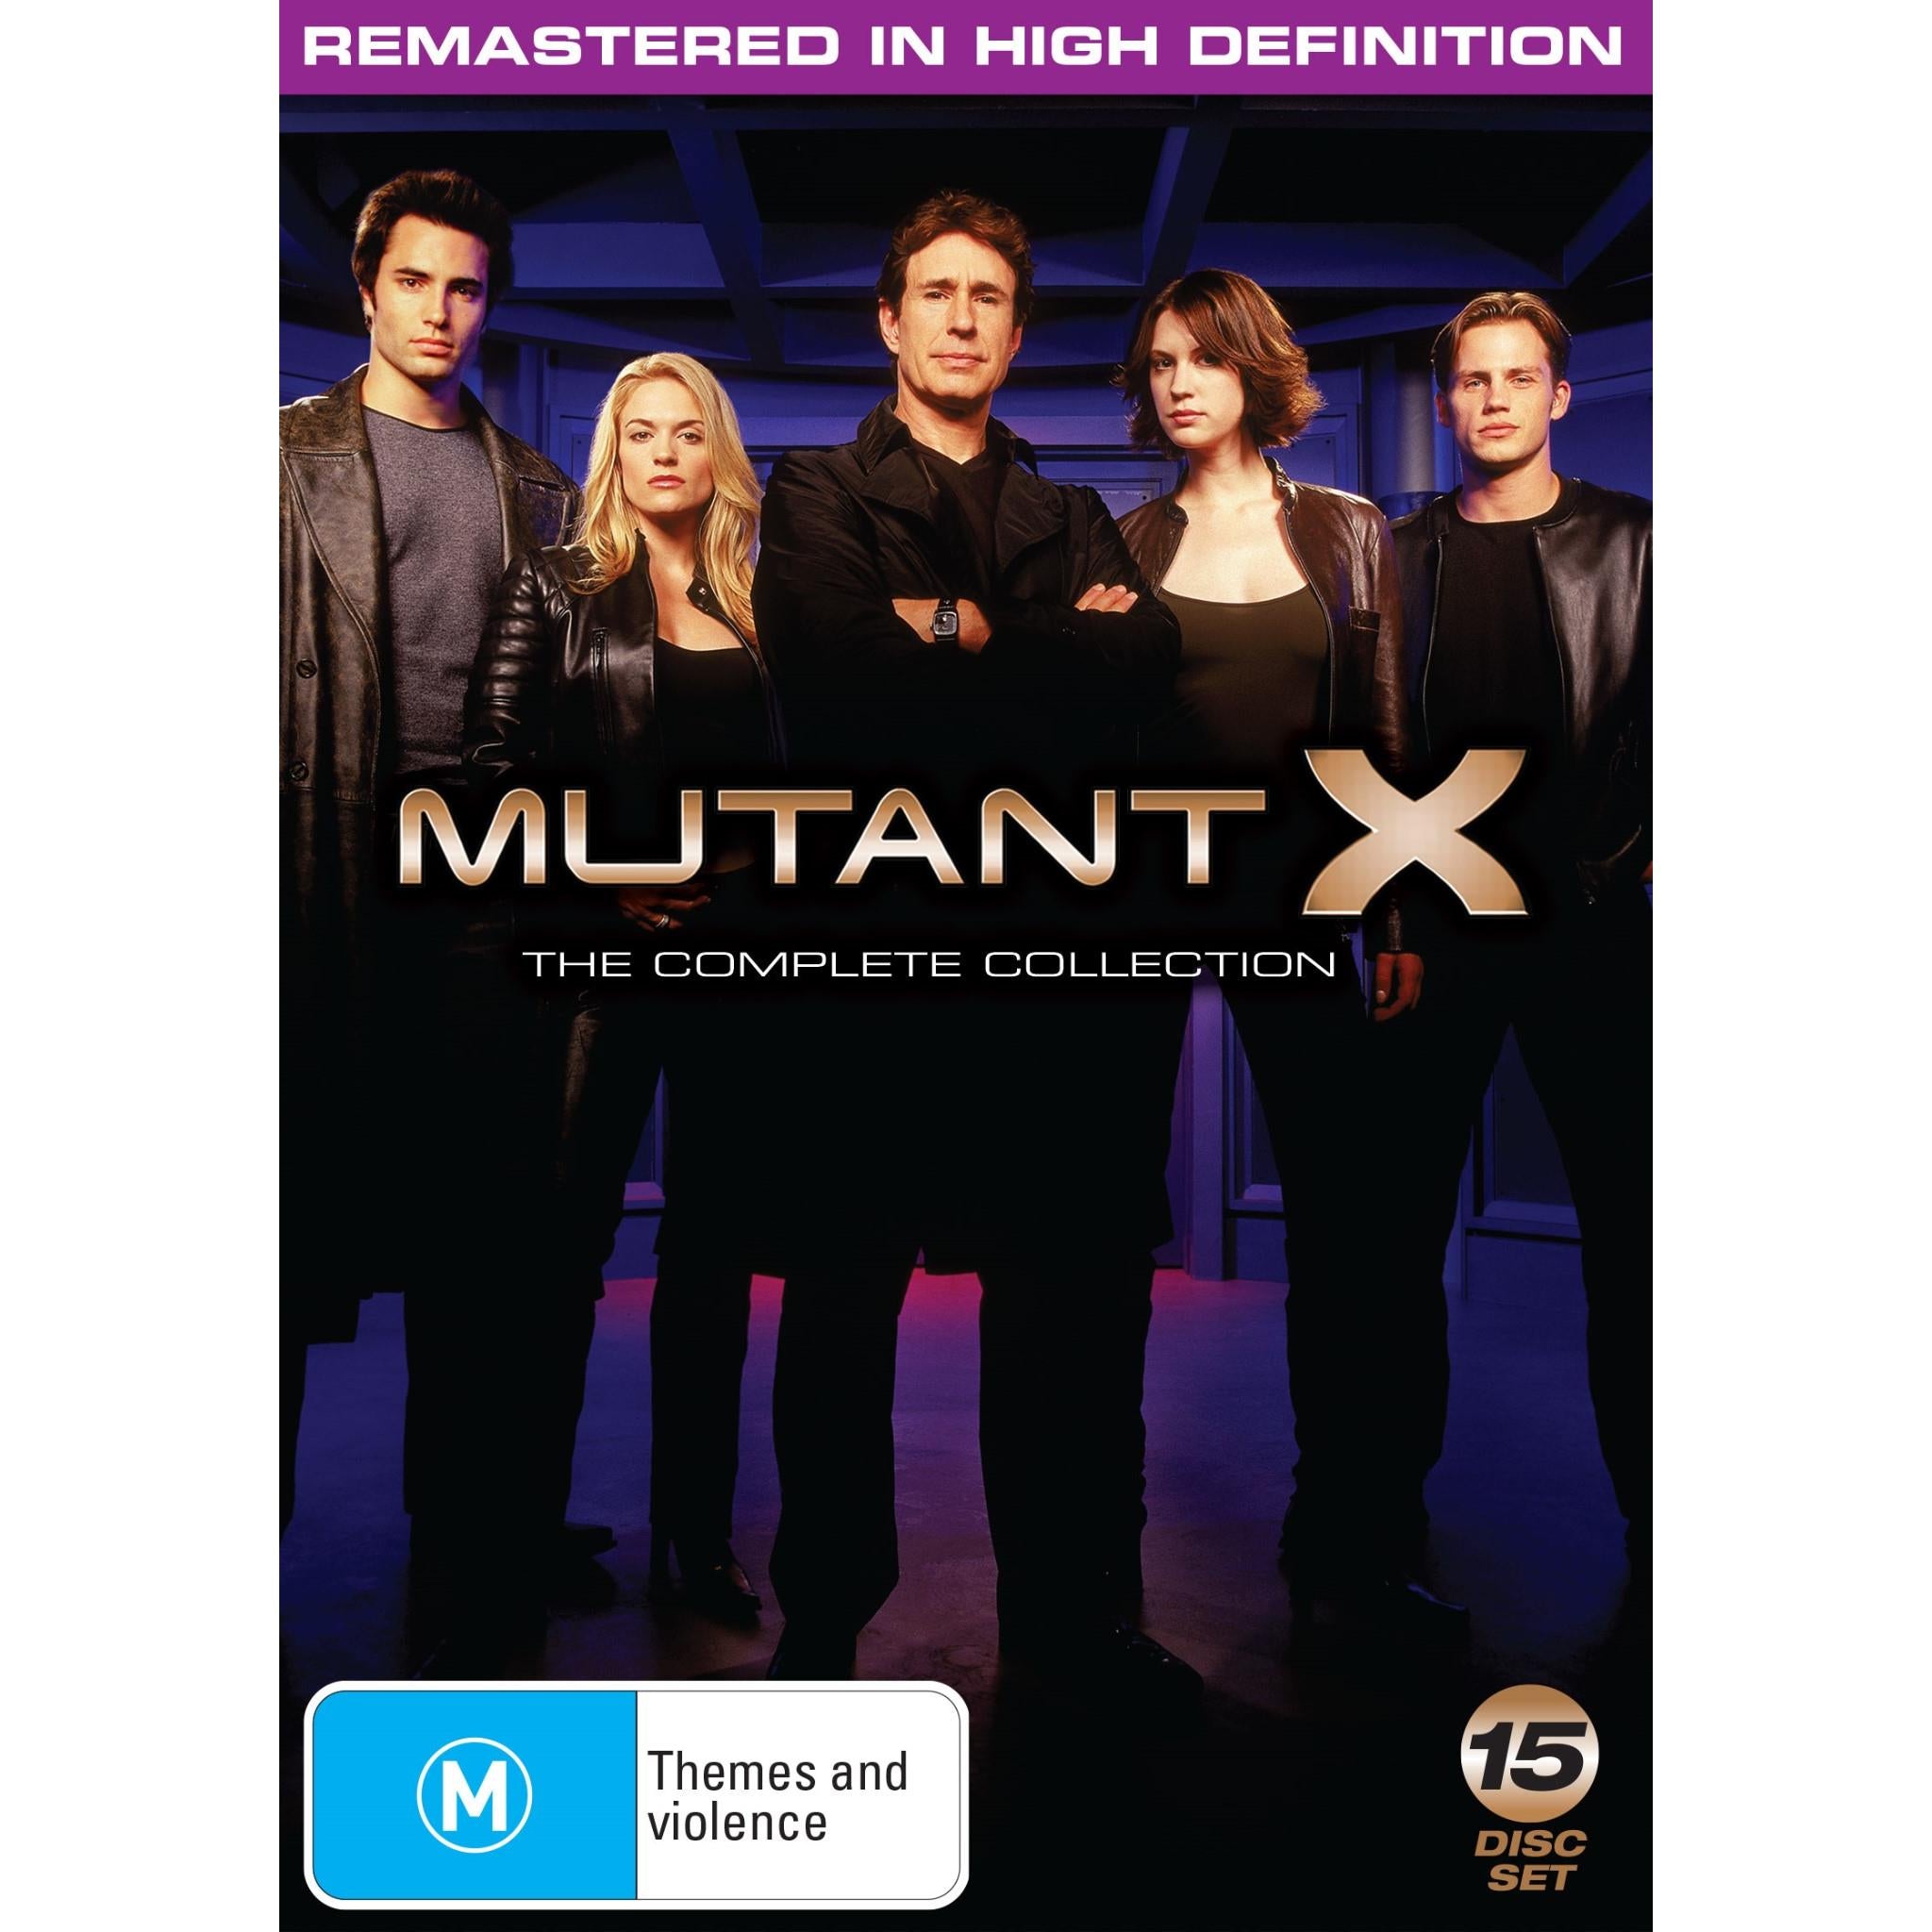 mutant x - the complete collection